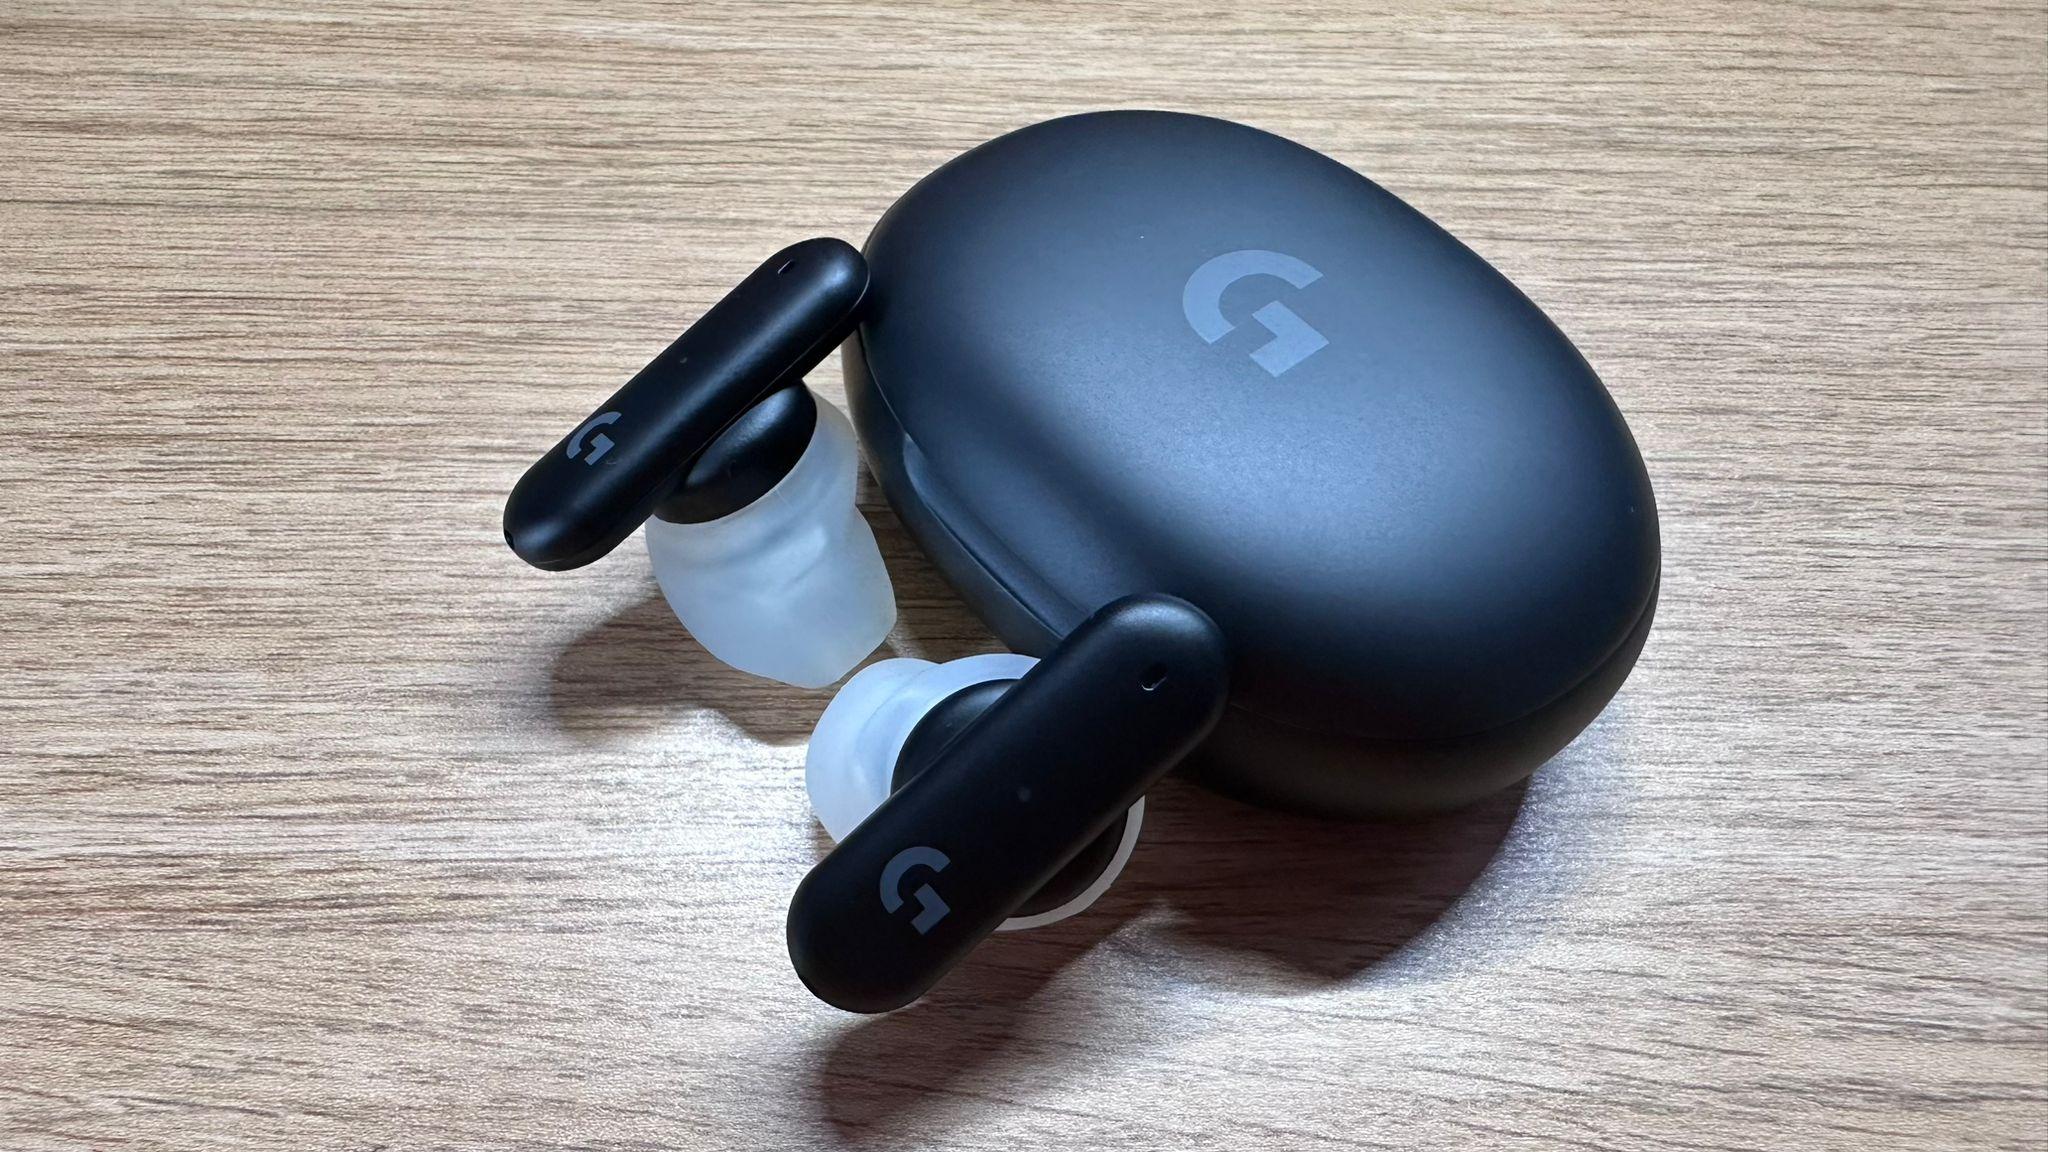 Logtech G fits case with earbuds